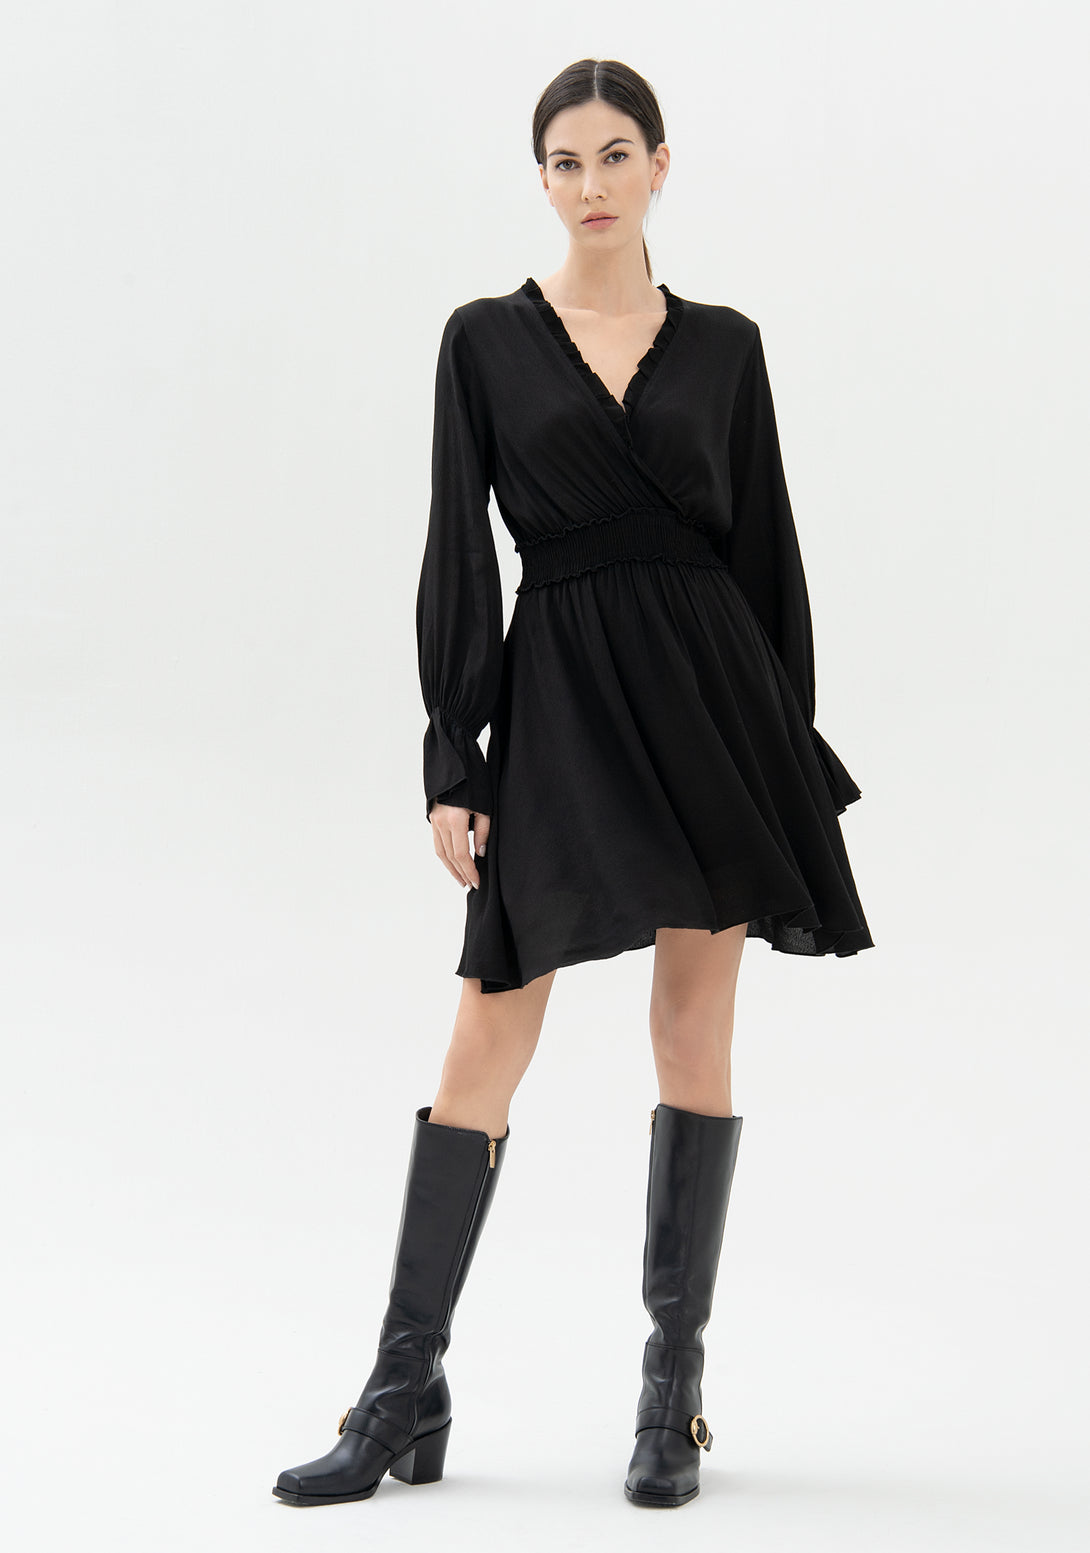 Mini dress with long sleeves made in viscose